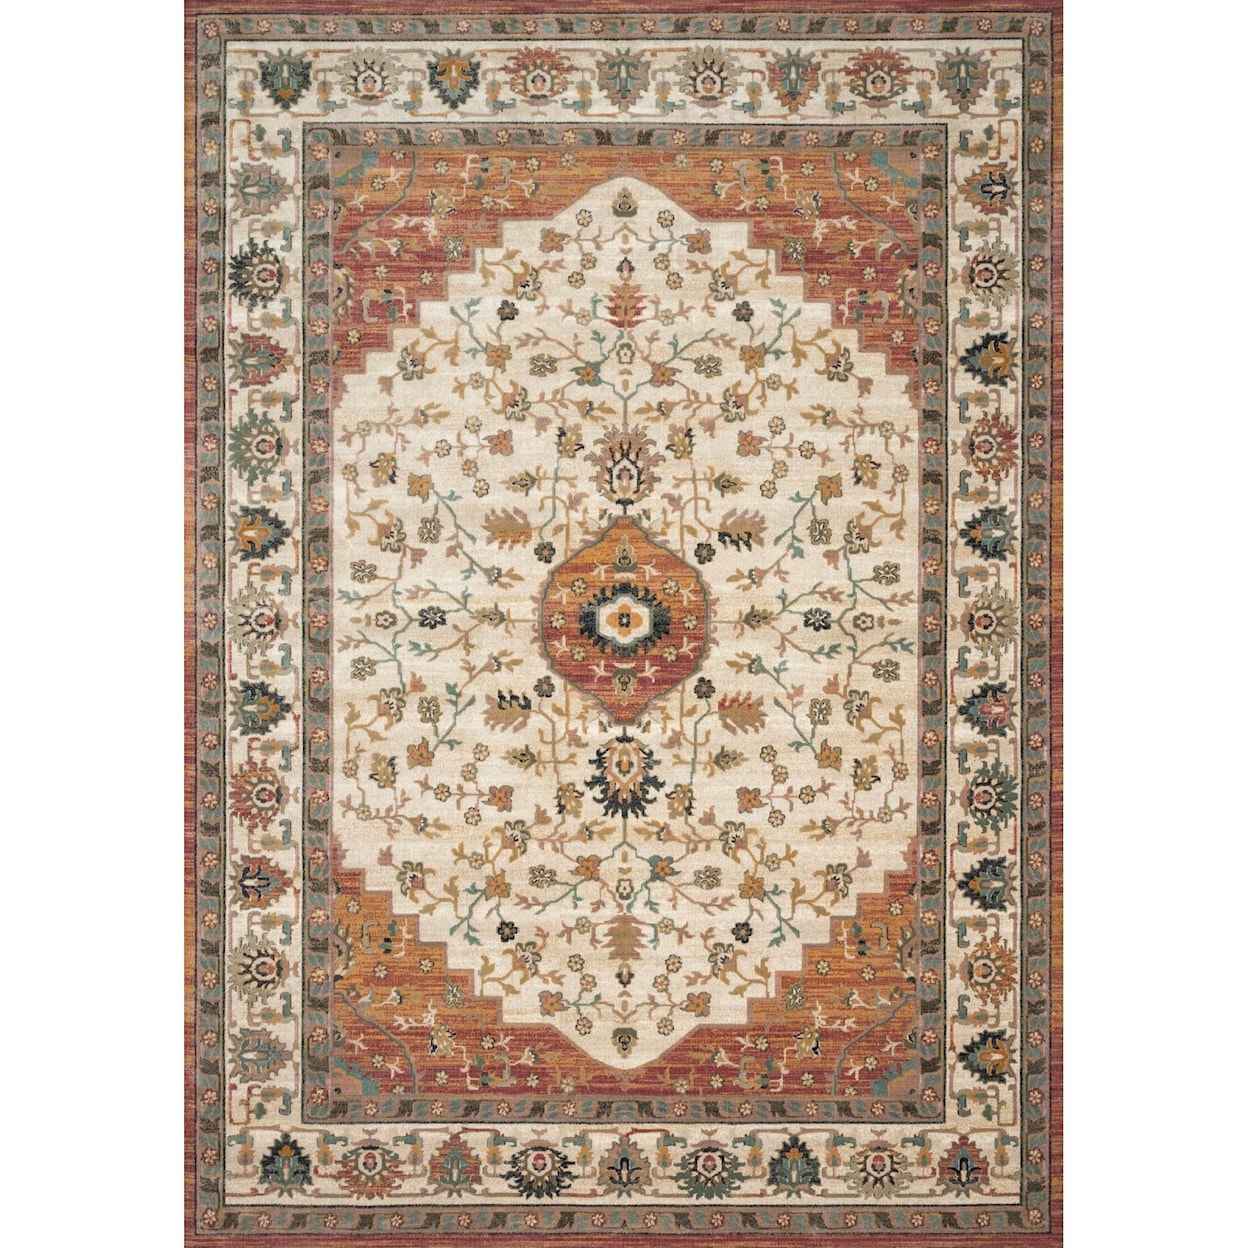 Magnolia Home by Joanna Gaines for Loloi Evie 1'-6" x 1'-6" Square Rug